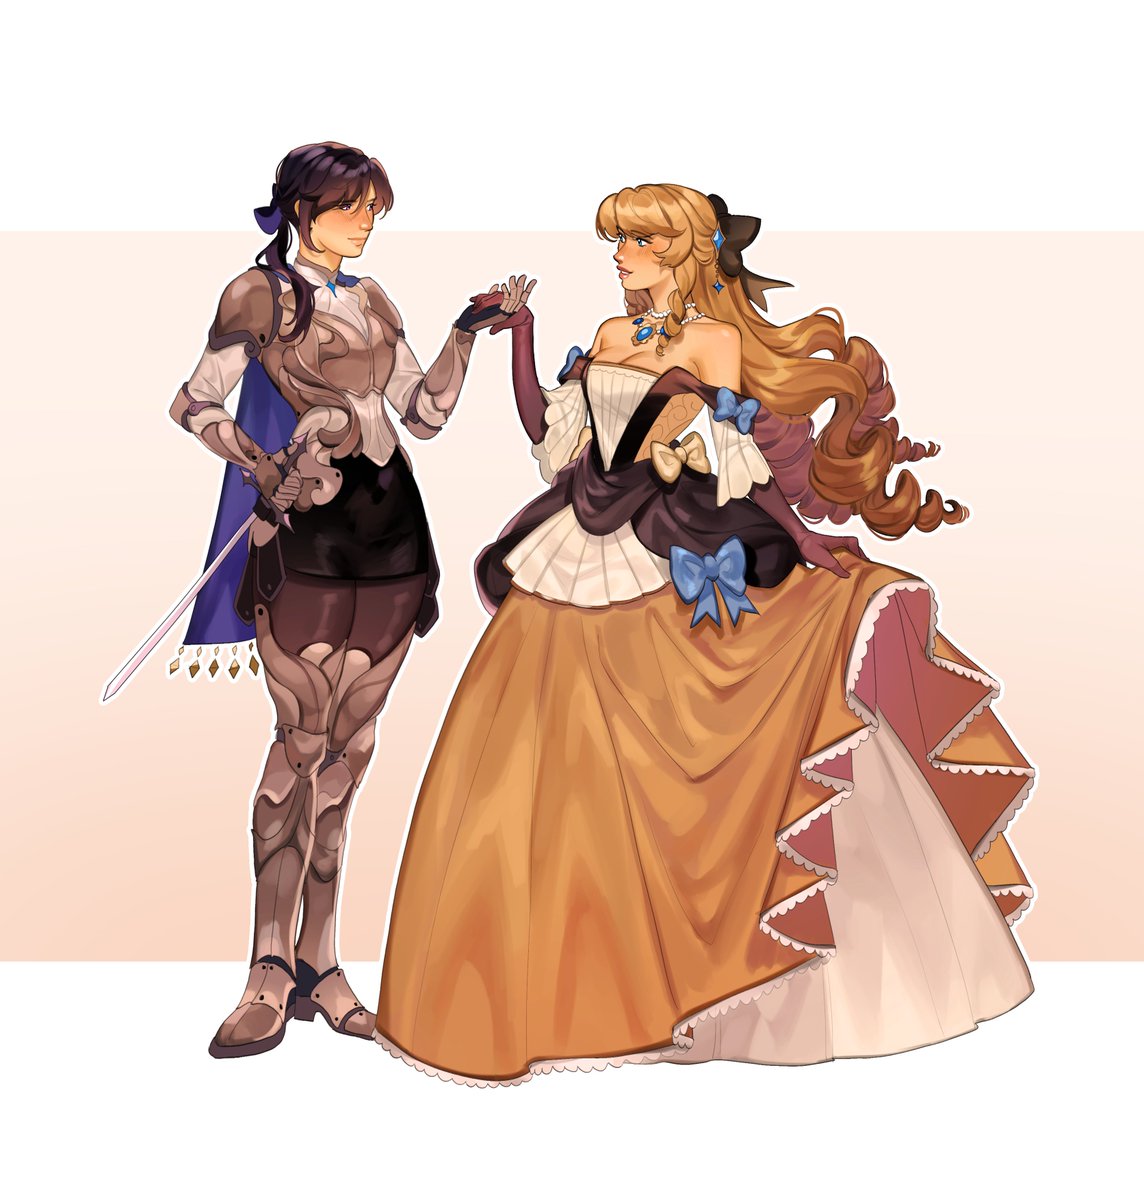 The princess and her most loyal knight #clorivia